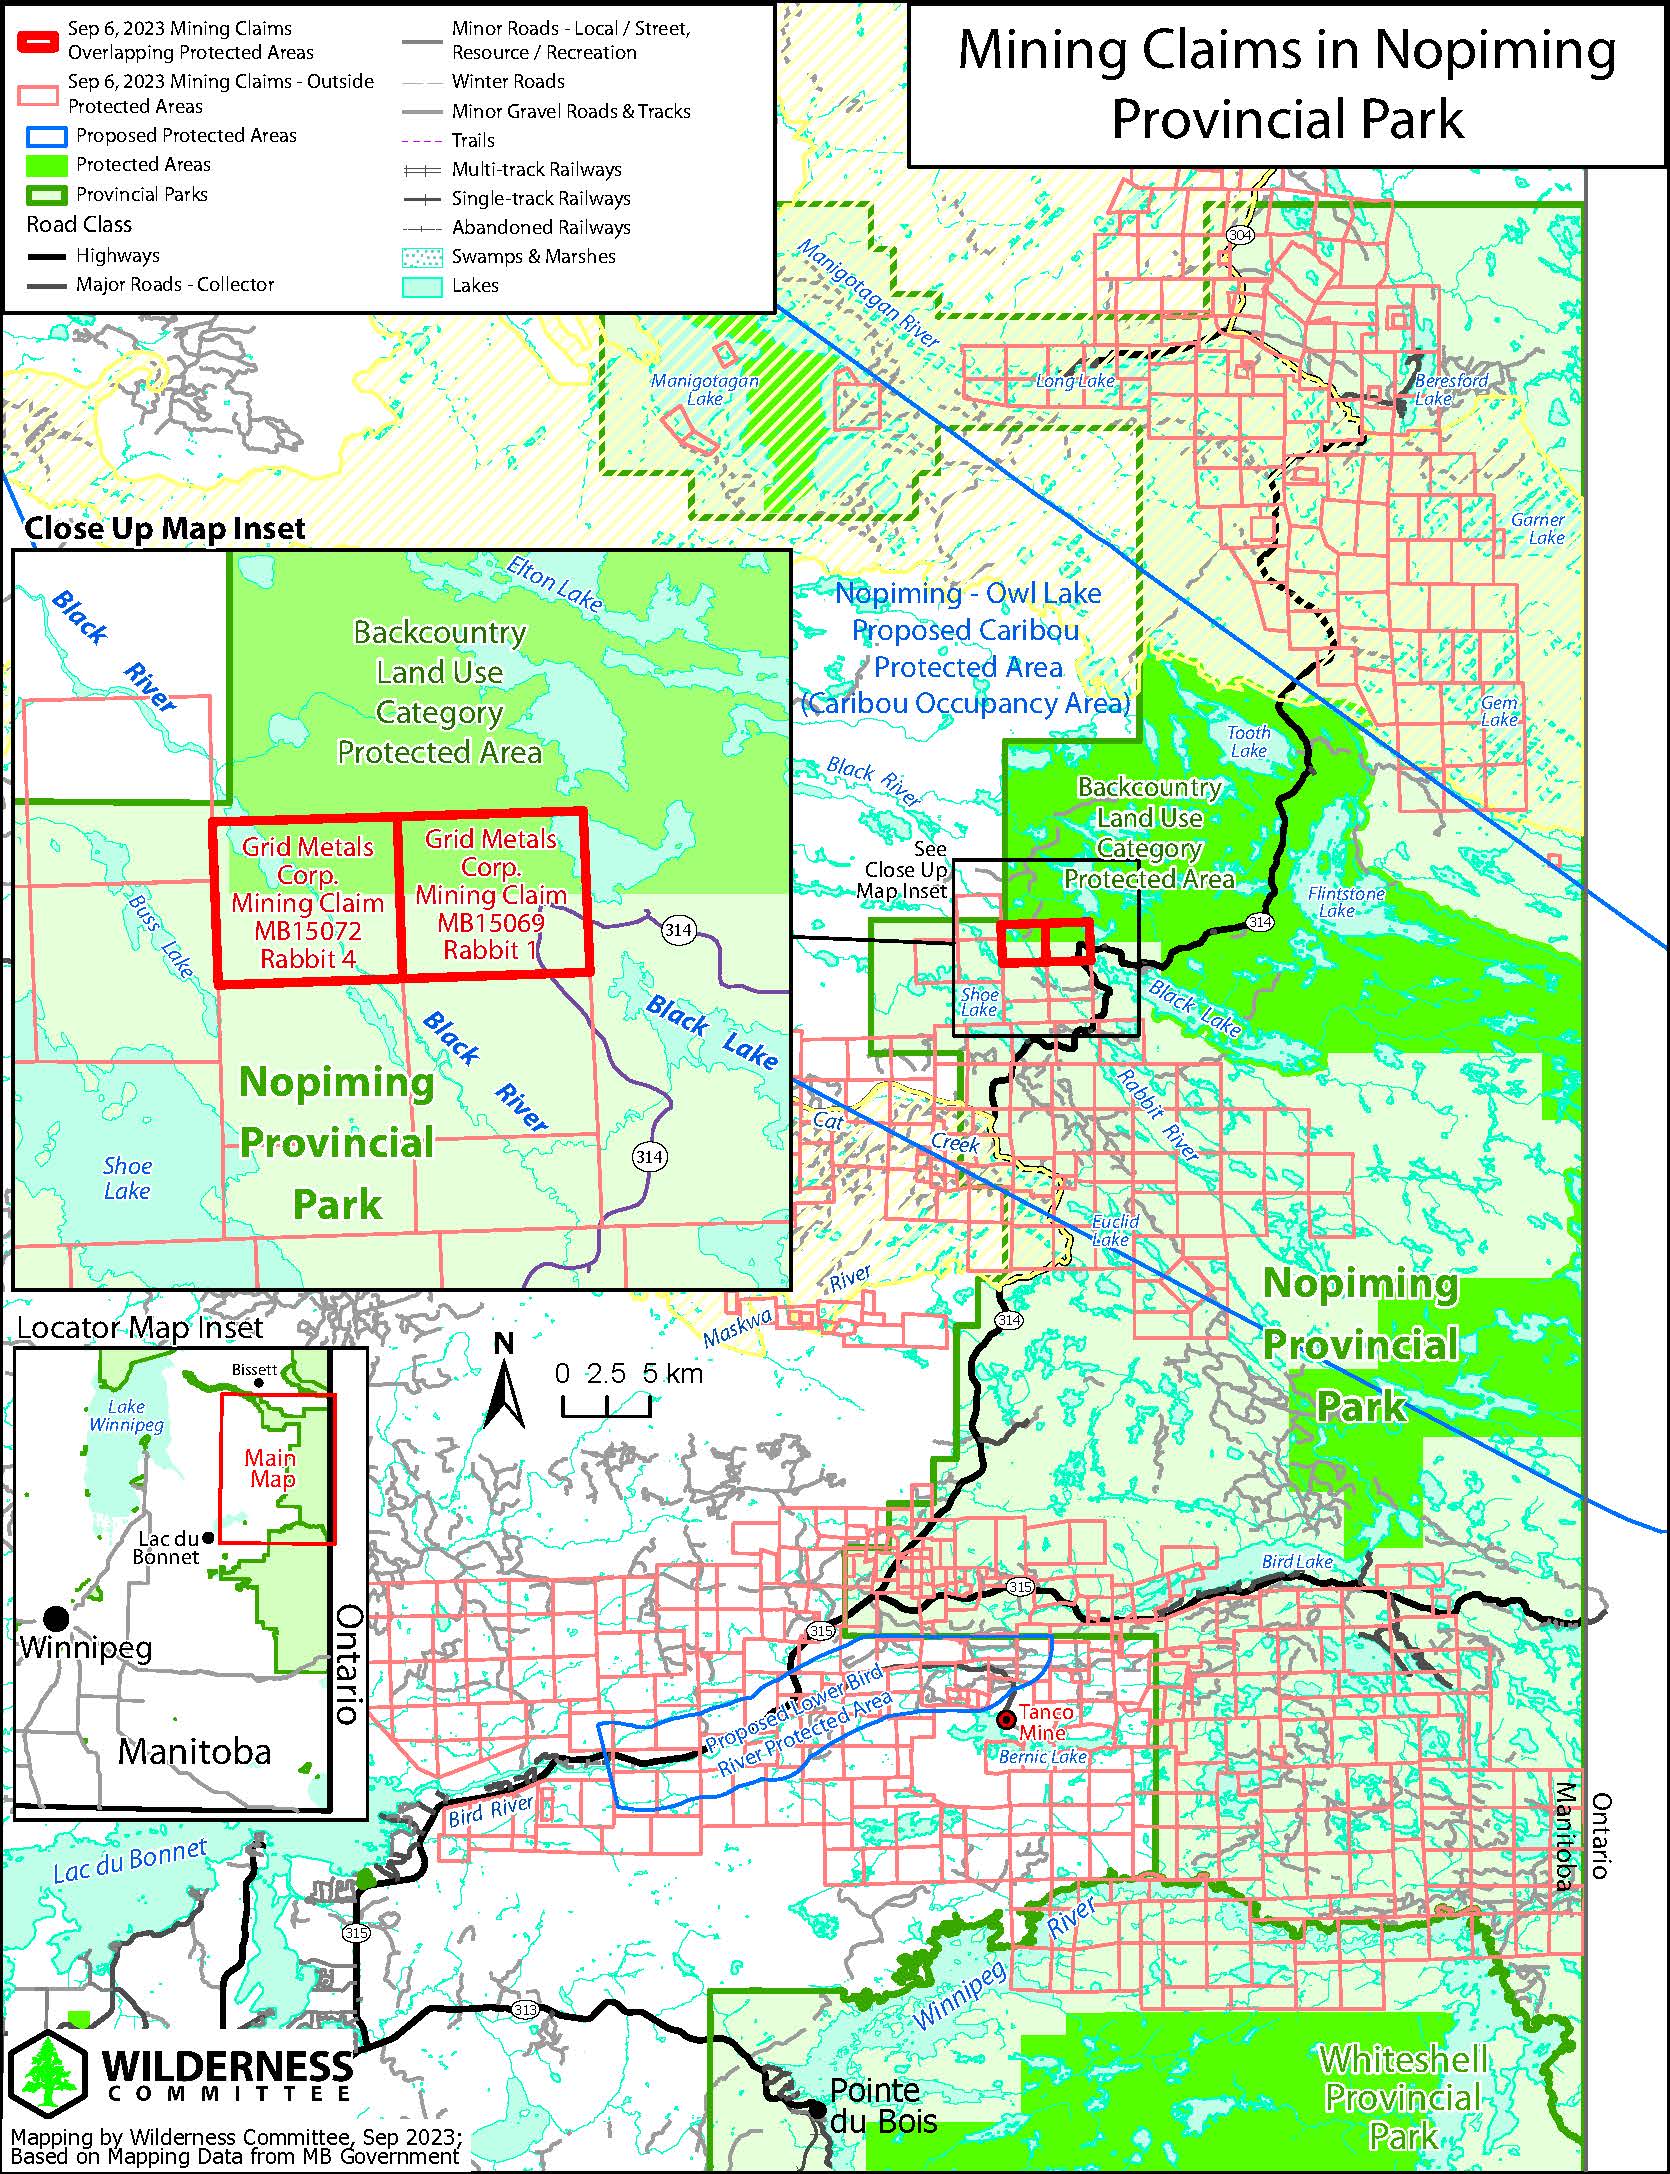 Mining claims in Nopiming Provincial Park